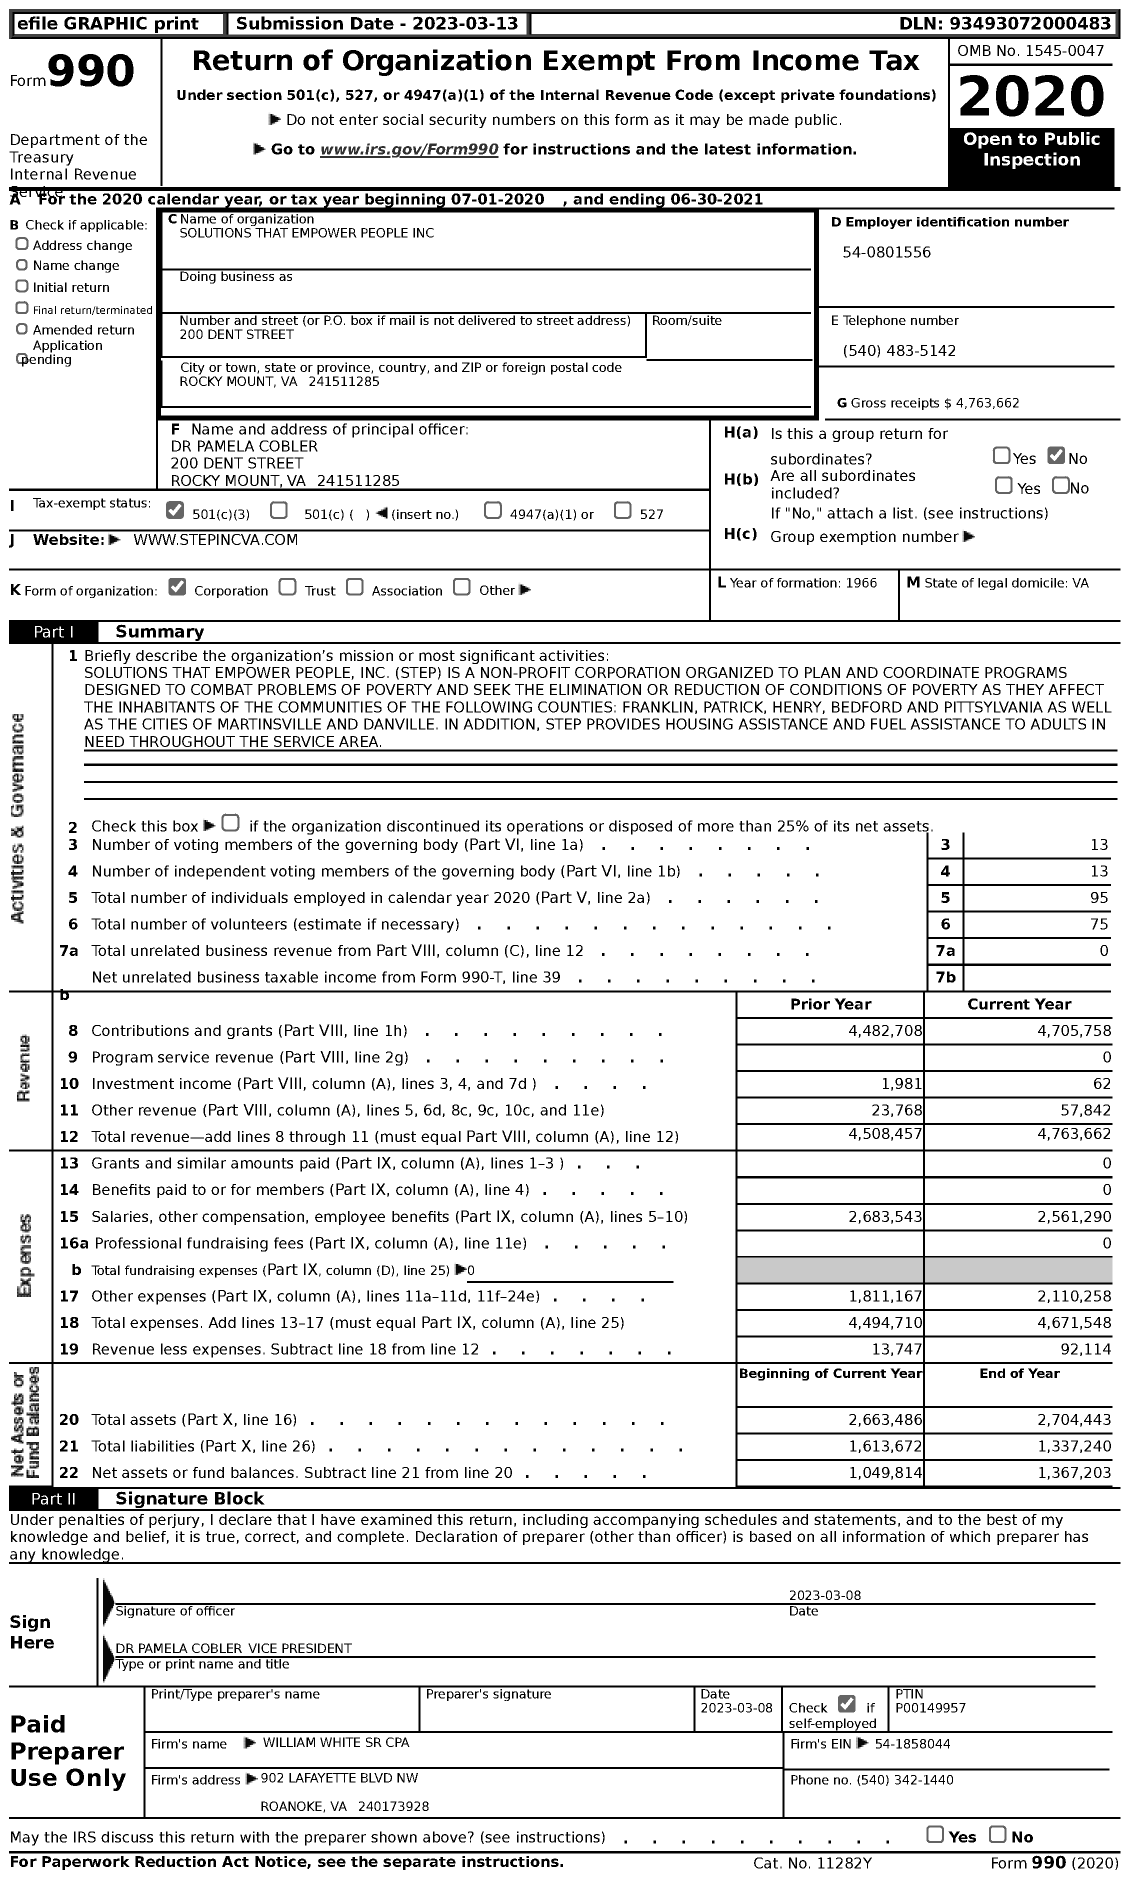 Image of first page of 2020 Form 990 for Solutions that Empower People